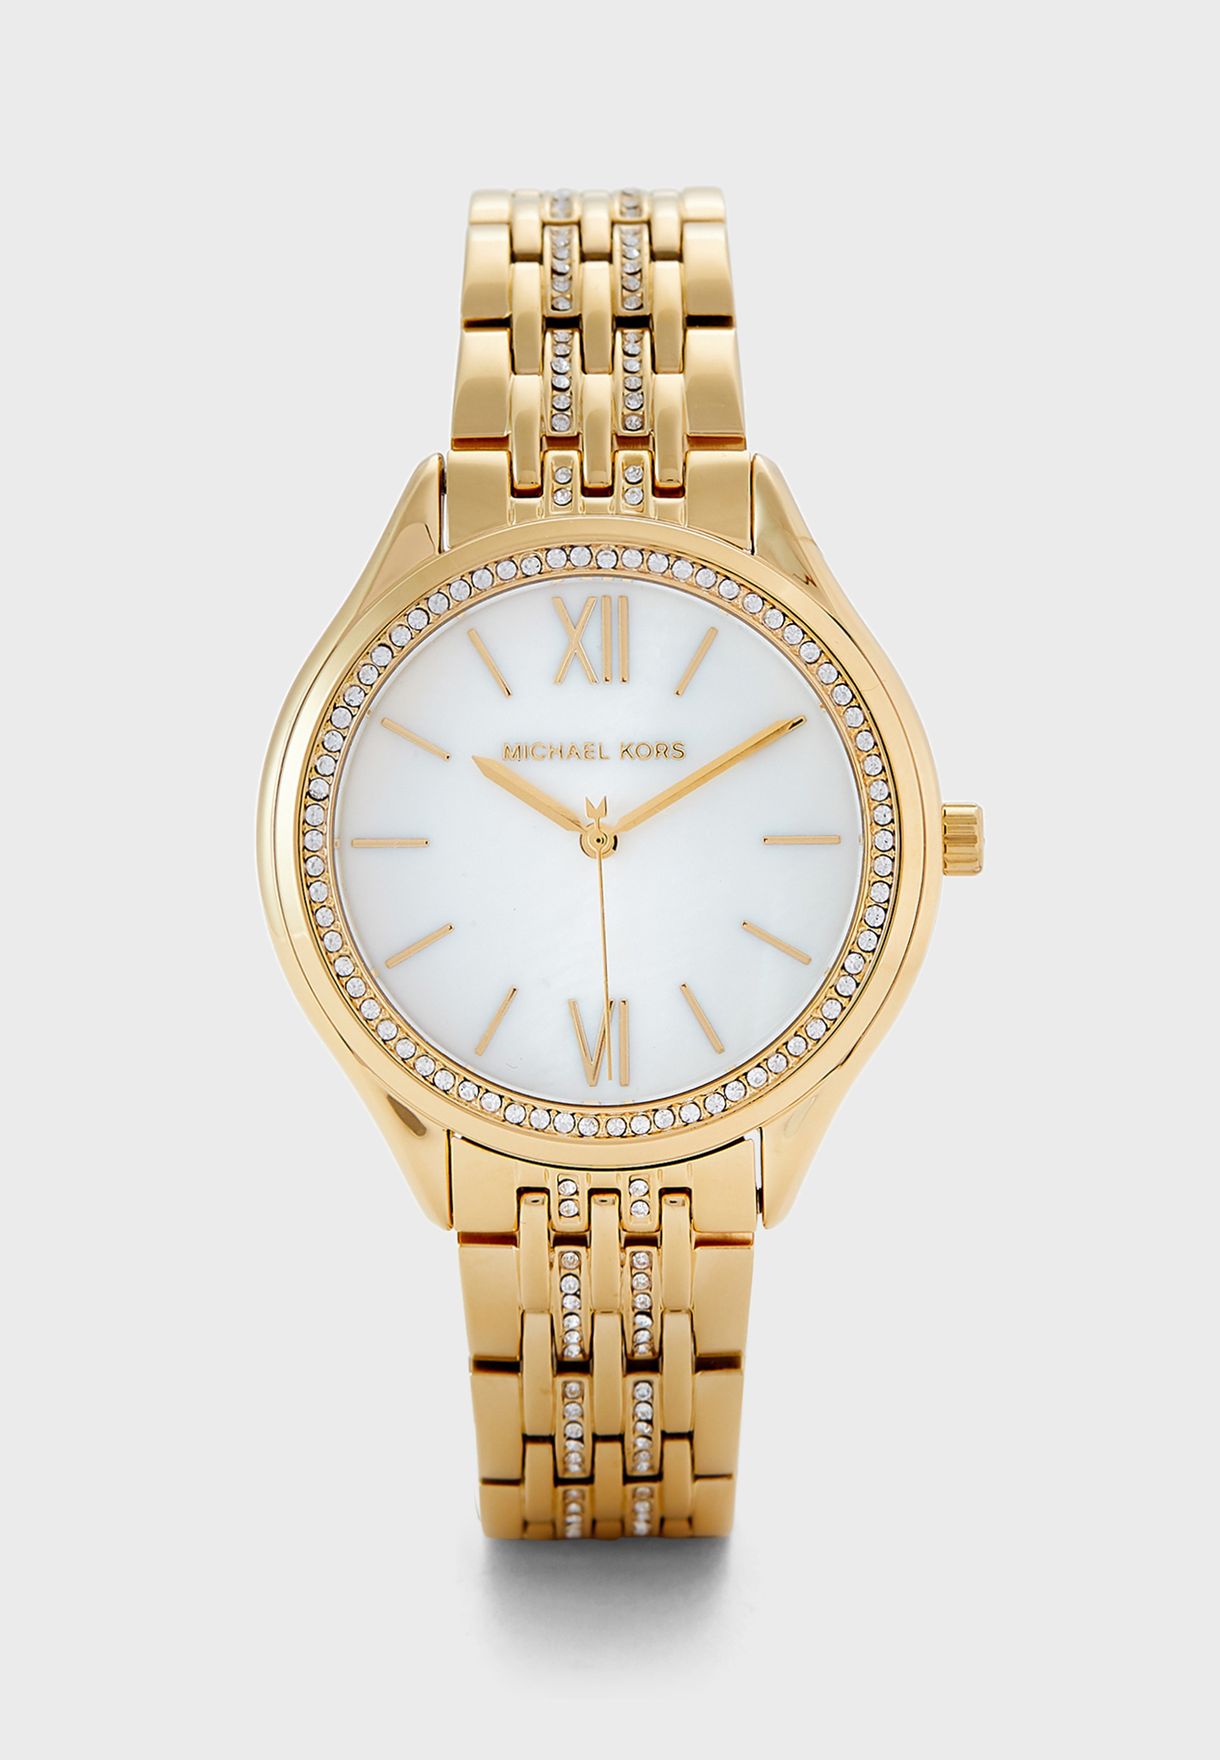 how much can i get for a michael kors watch